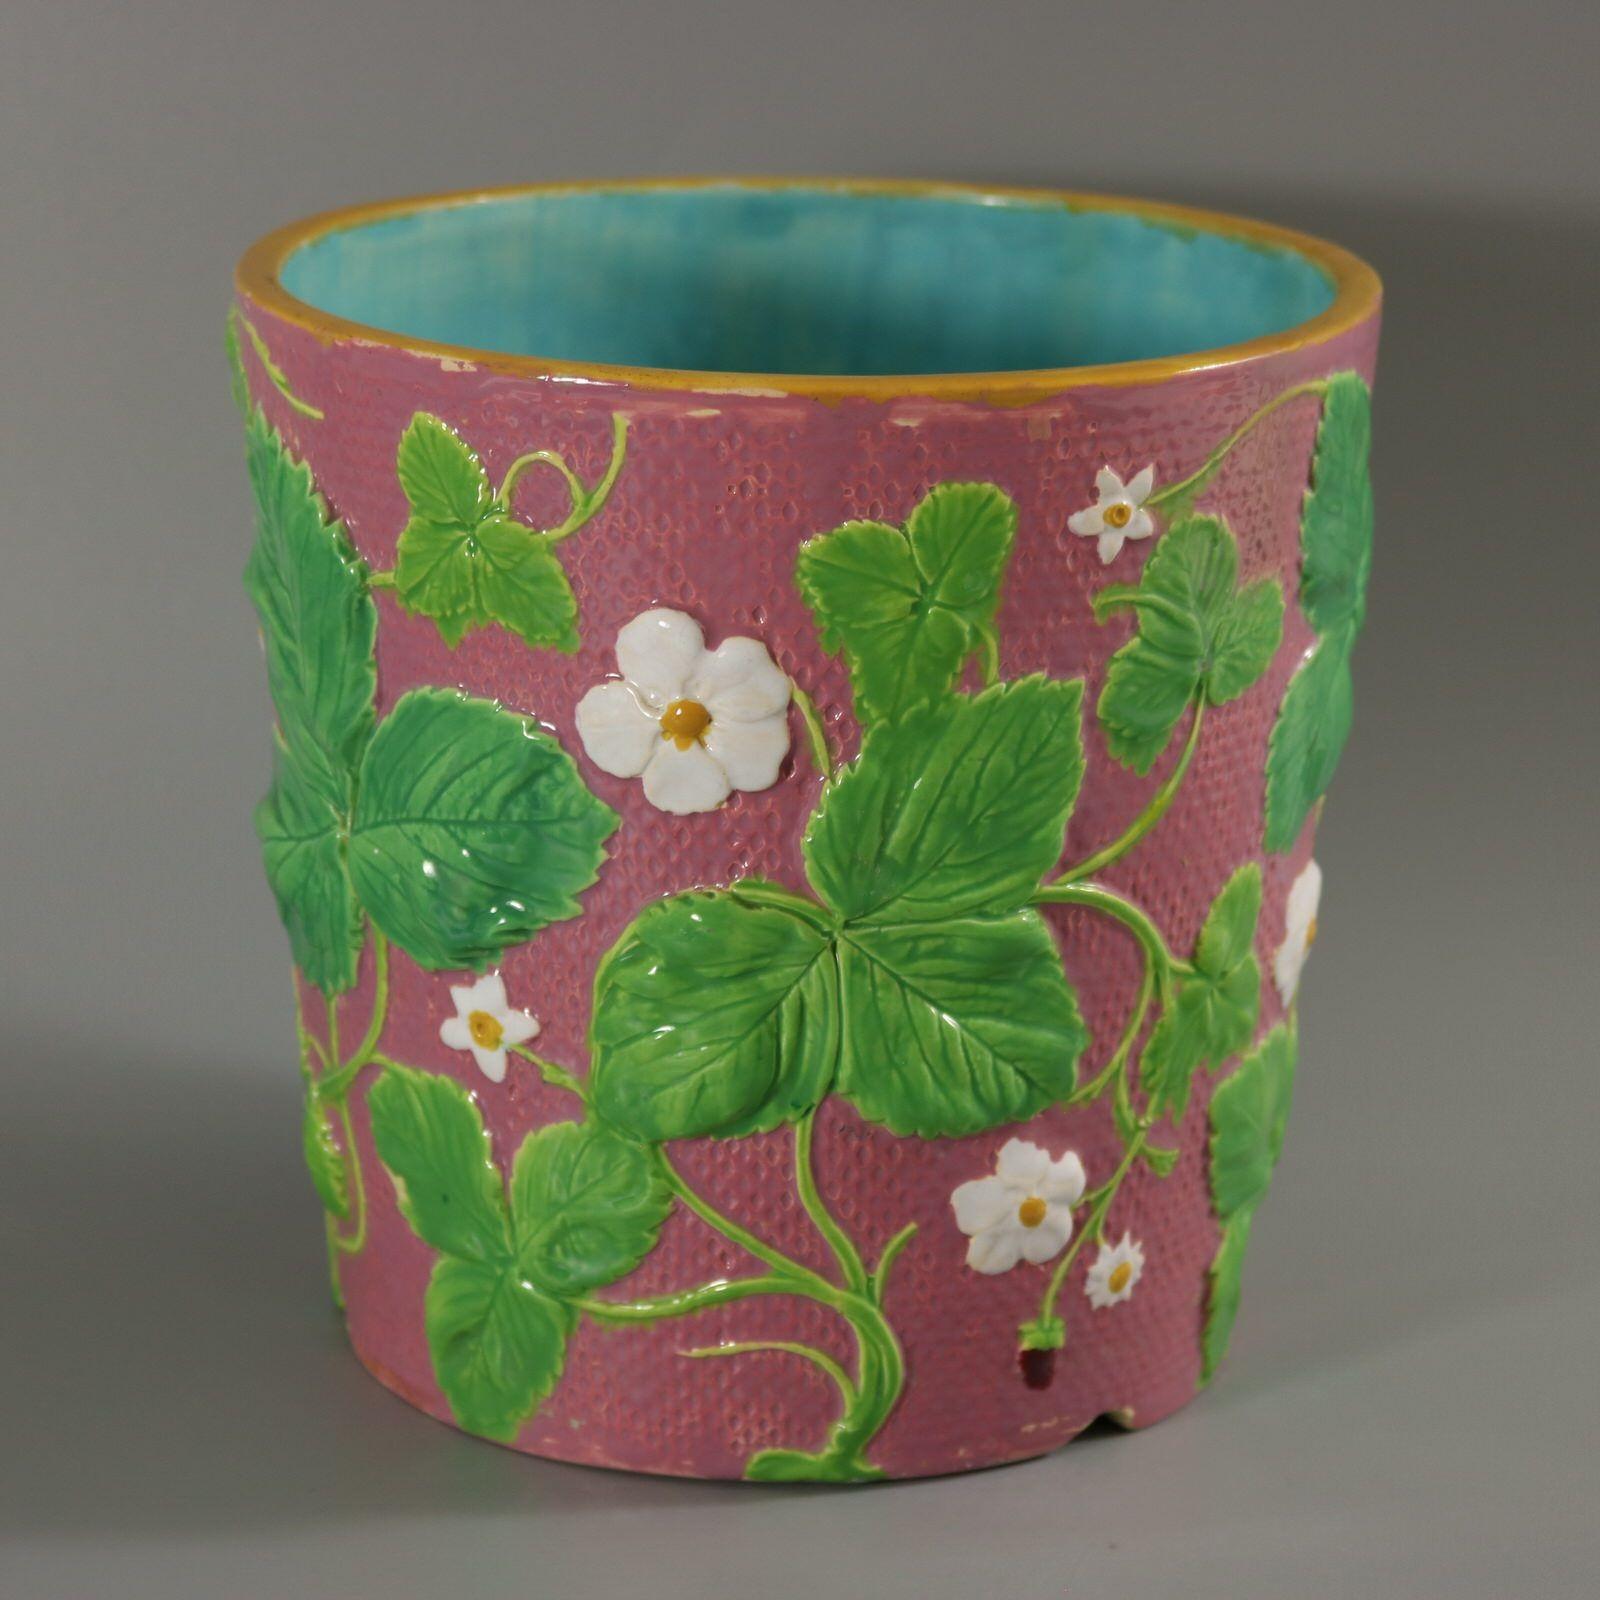 Minton Majolica planter which features strawberries, leaves and blossoms. Pink ground version. Colouration: pink, green, white, are predominant. The piece bears maker's marks for the Minton pottery. Bears a pattern number, '811'. Marks include a